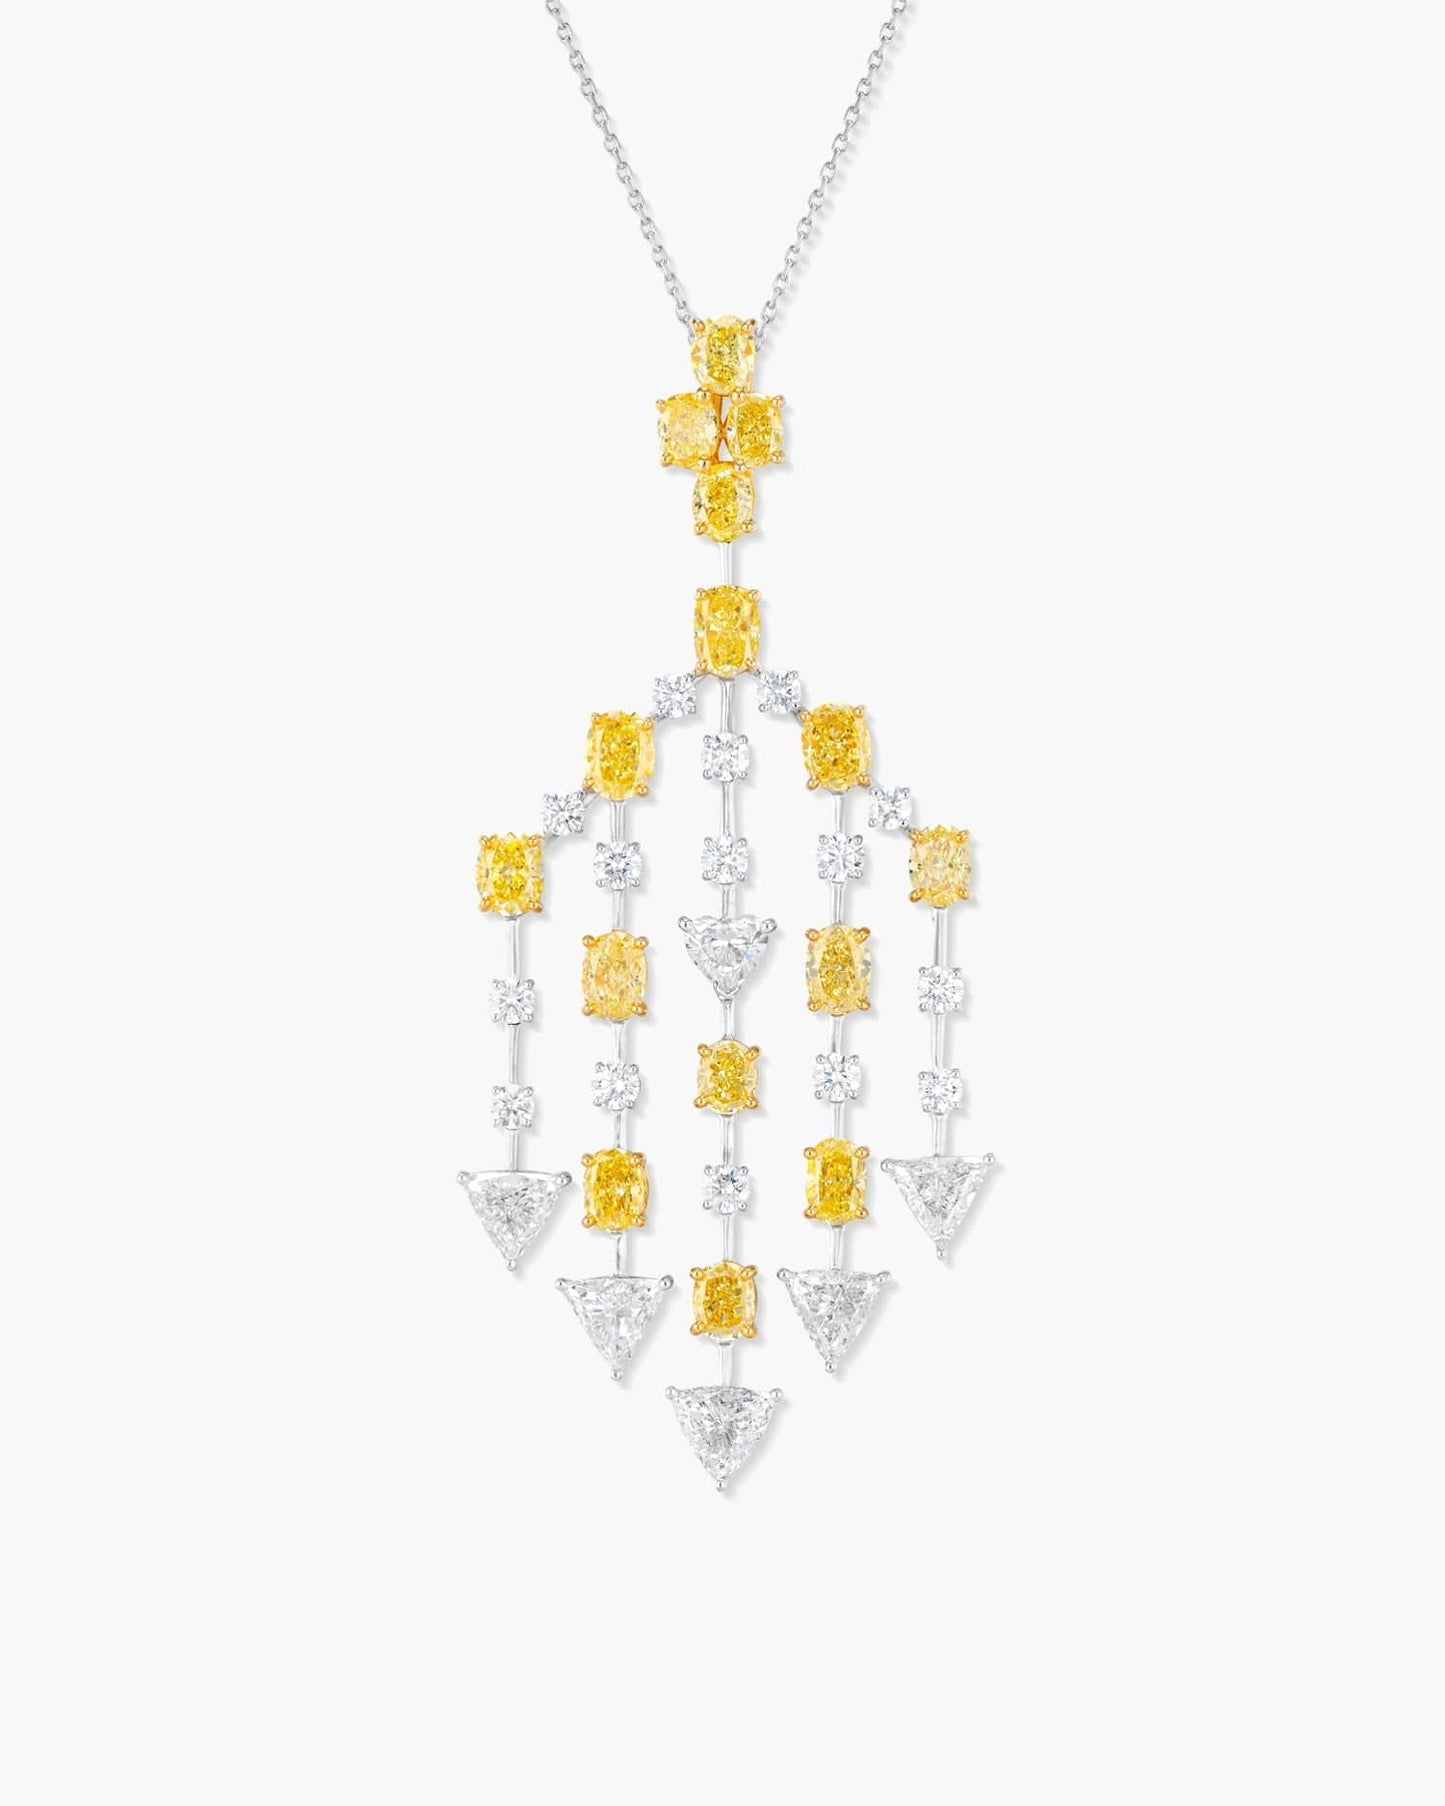 Oval Shaped Yellow and White Diamond Pendant Necklace, 11.34 carats